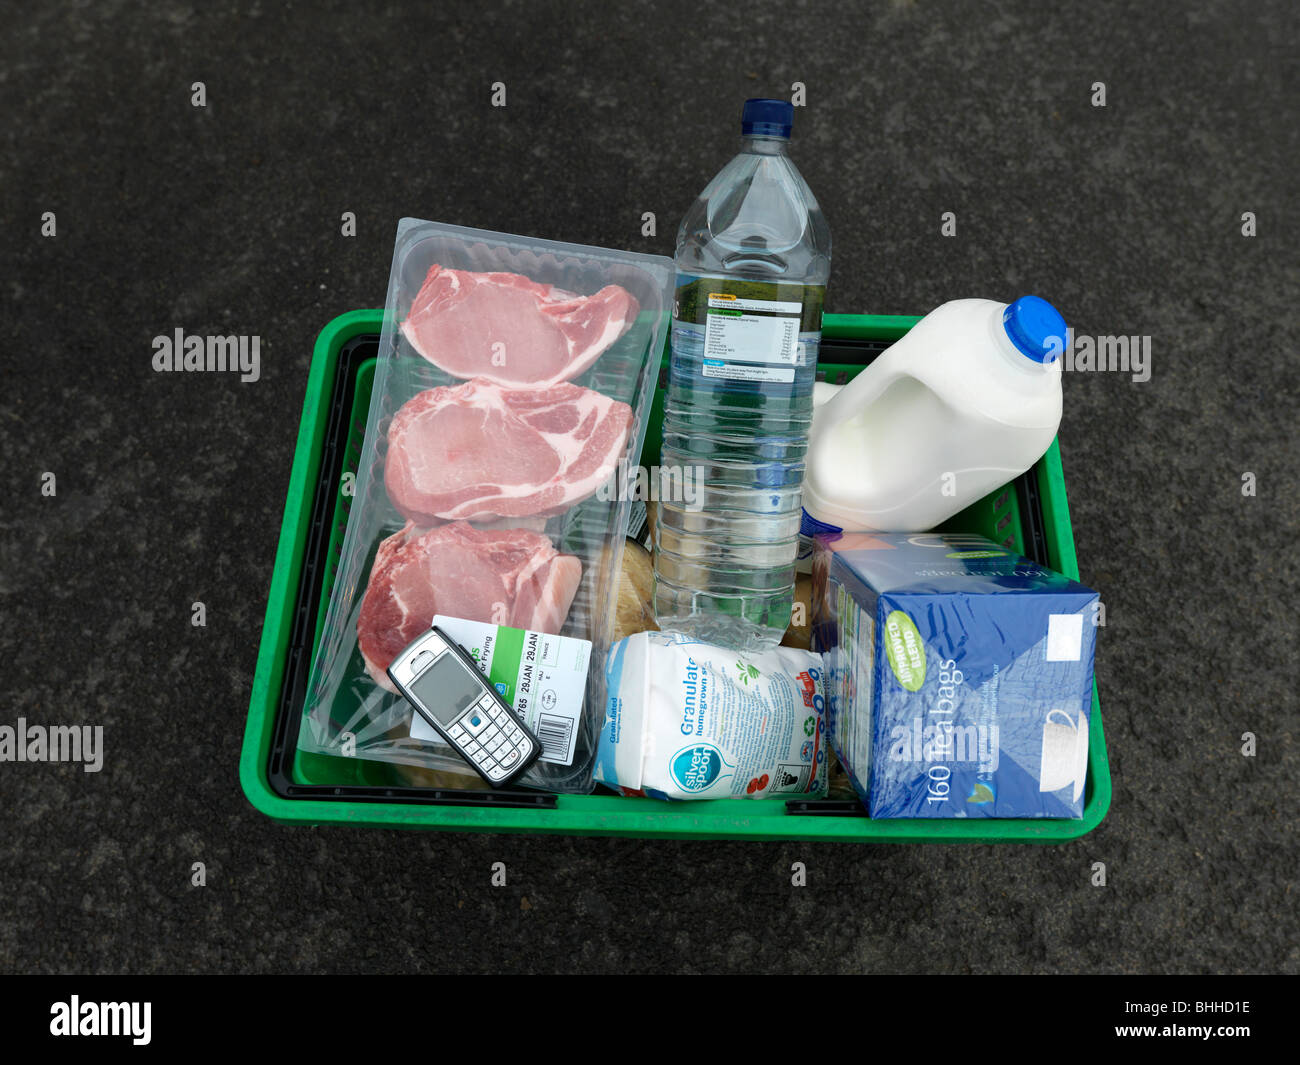 Supermarket Shopping Basket Containing Milk, Meat, Mobile Phone, Sugar, Bottled Water and Tea Stock Photo